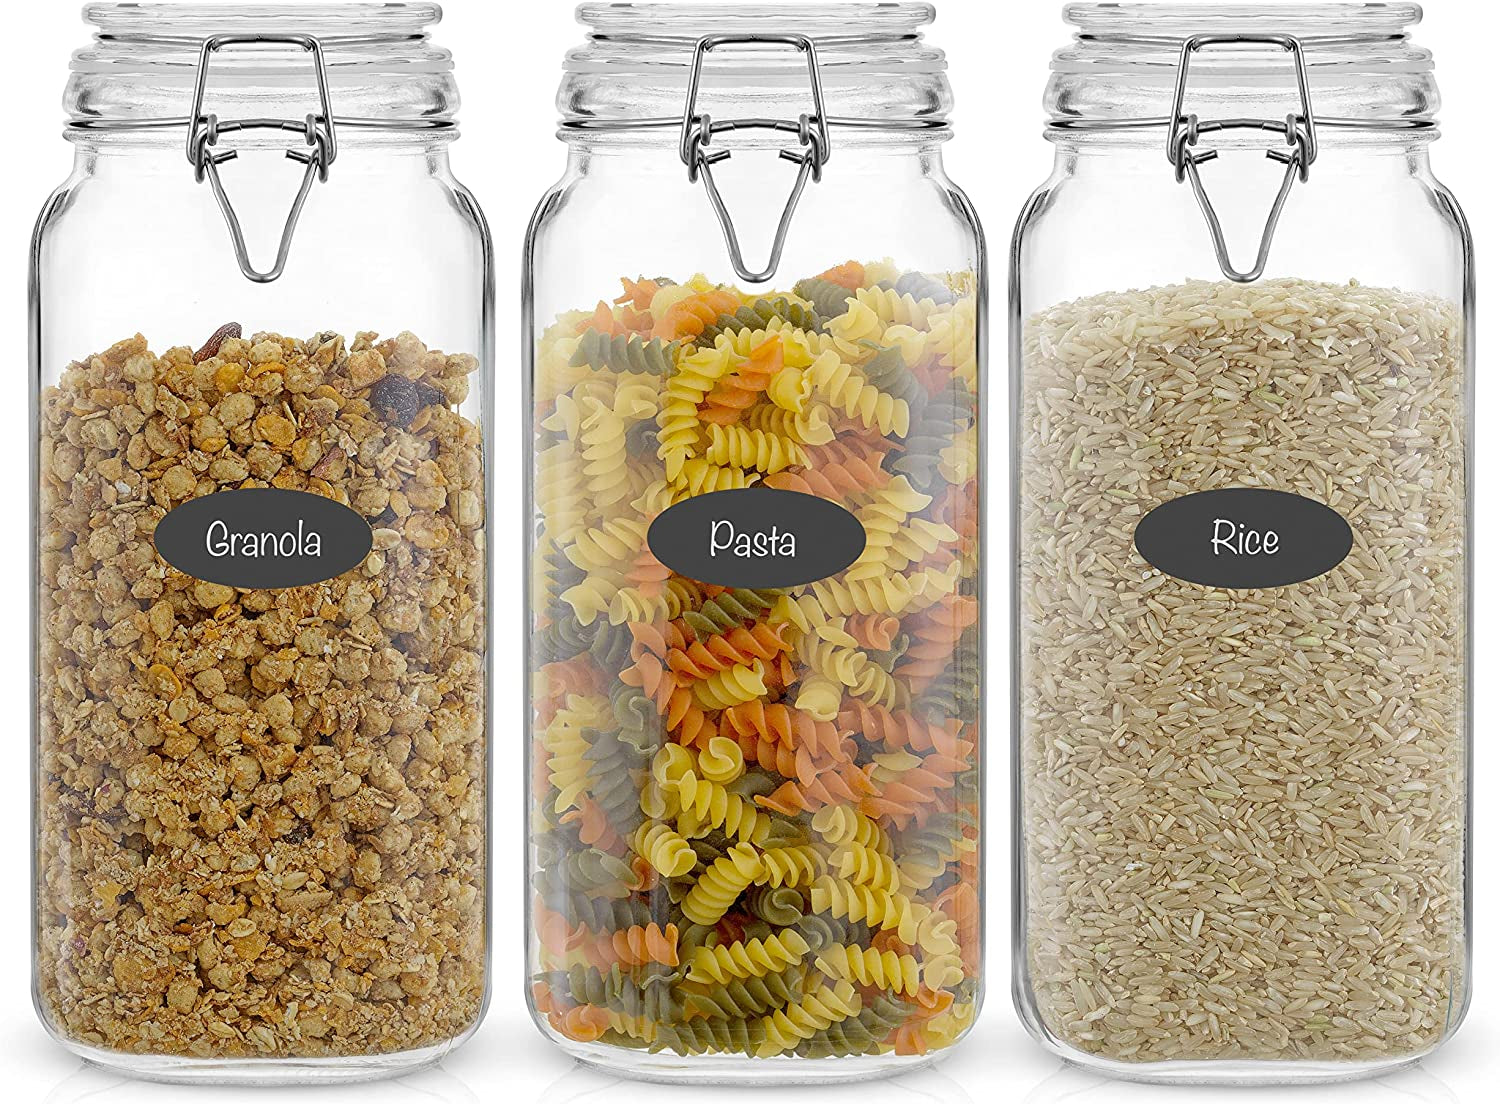 Koovon Glass Spice Jars with Airtight Screw-on Covers Shaker Lids